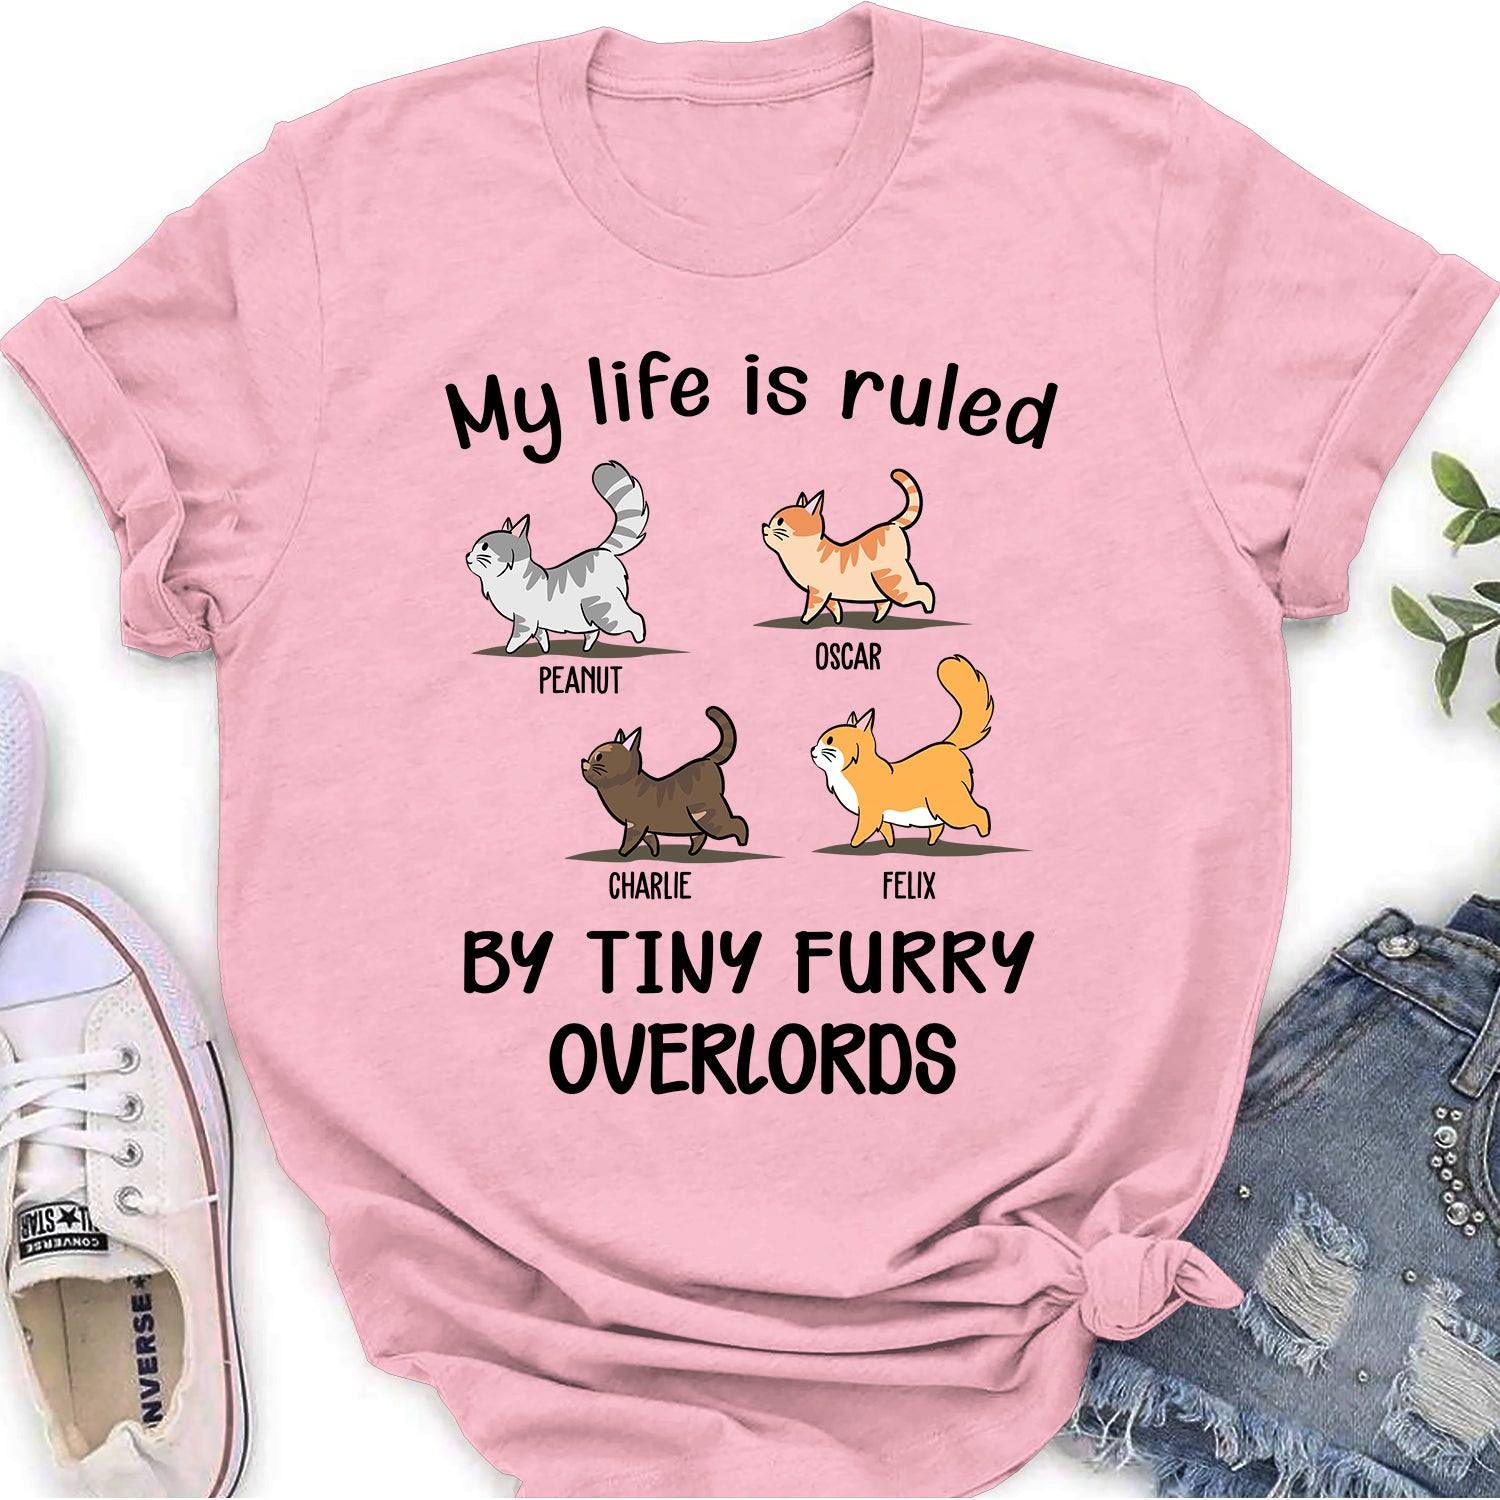 My Life Is Ruled By Cats - Personalized Custom Women's T-shirt 